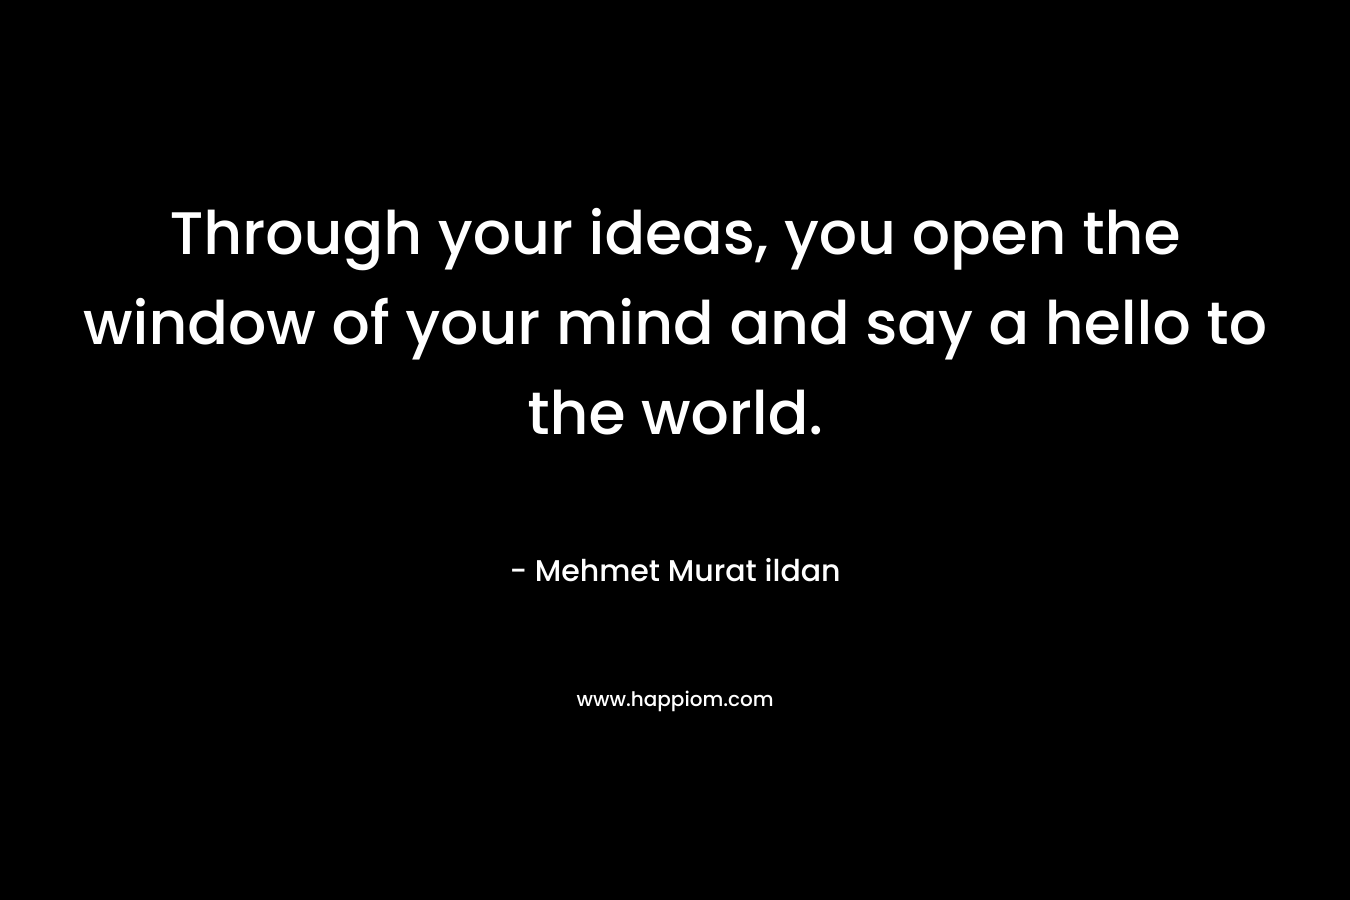 Through your ideas, you open the window of your mind and say a hello to the world.